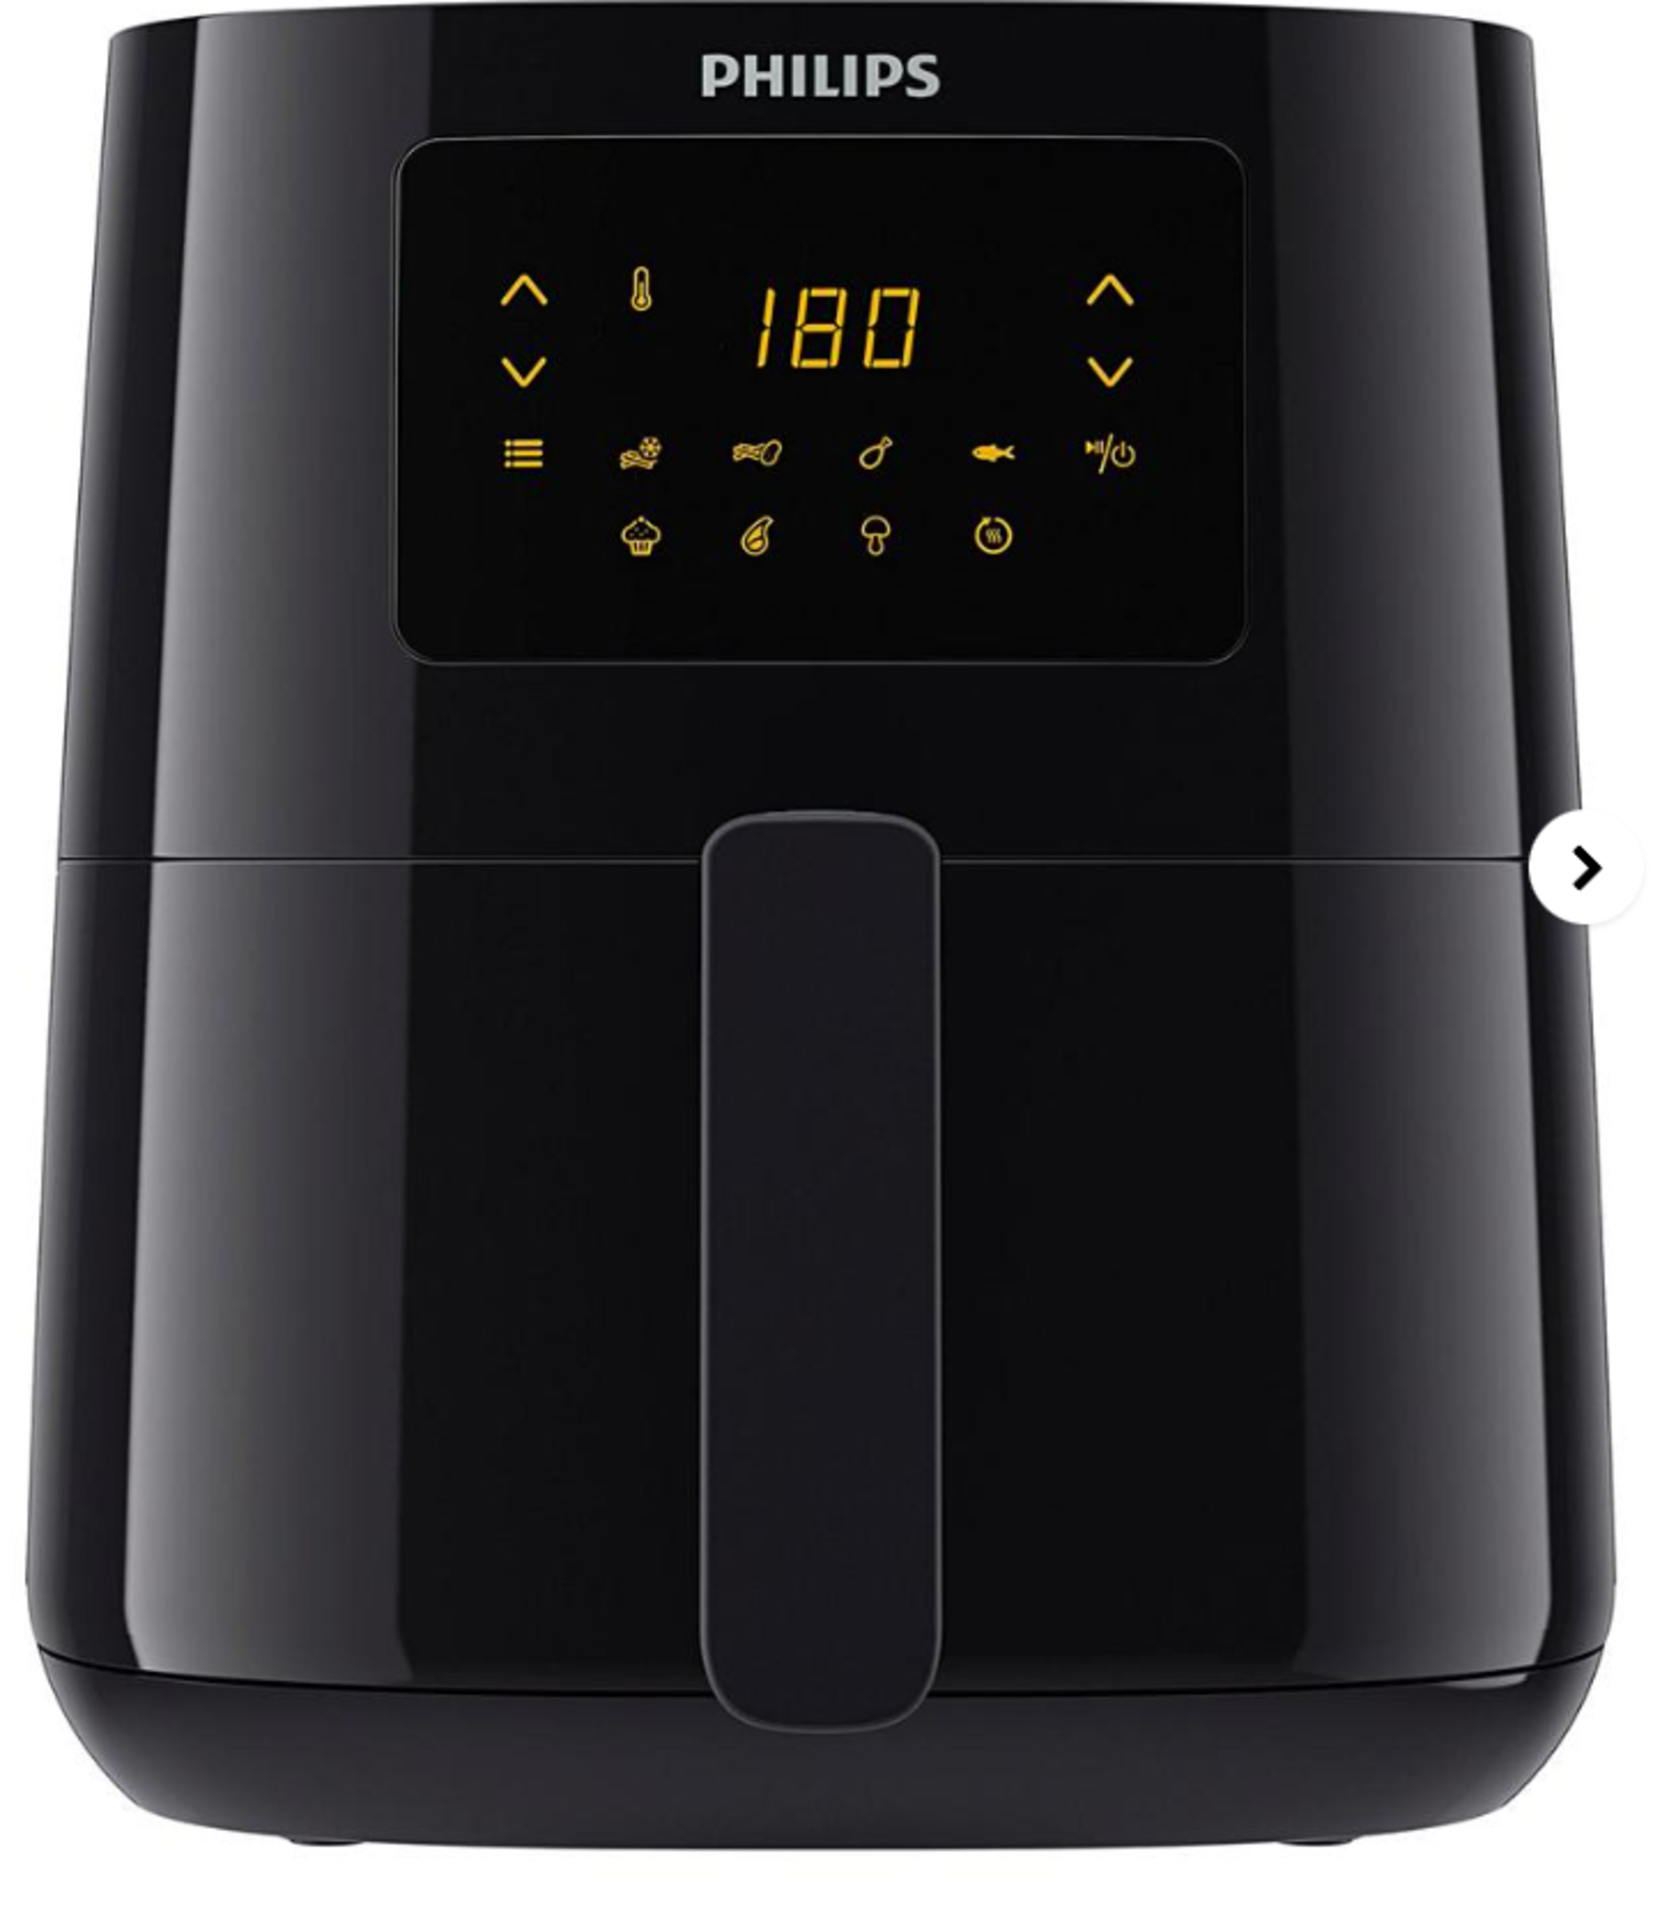 Philips HD9252/91 Essential Collection 4.1L Digital Air Fryer. - ER22. RRP £159.99. Philips brings